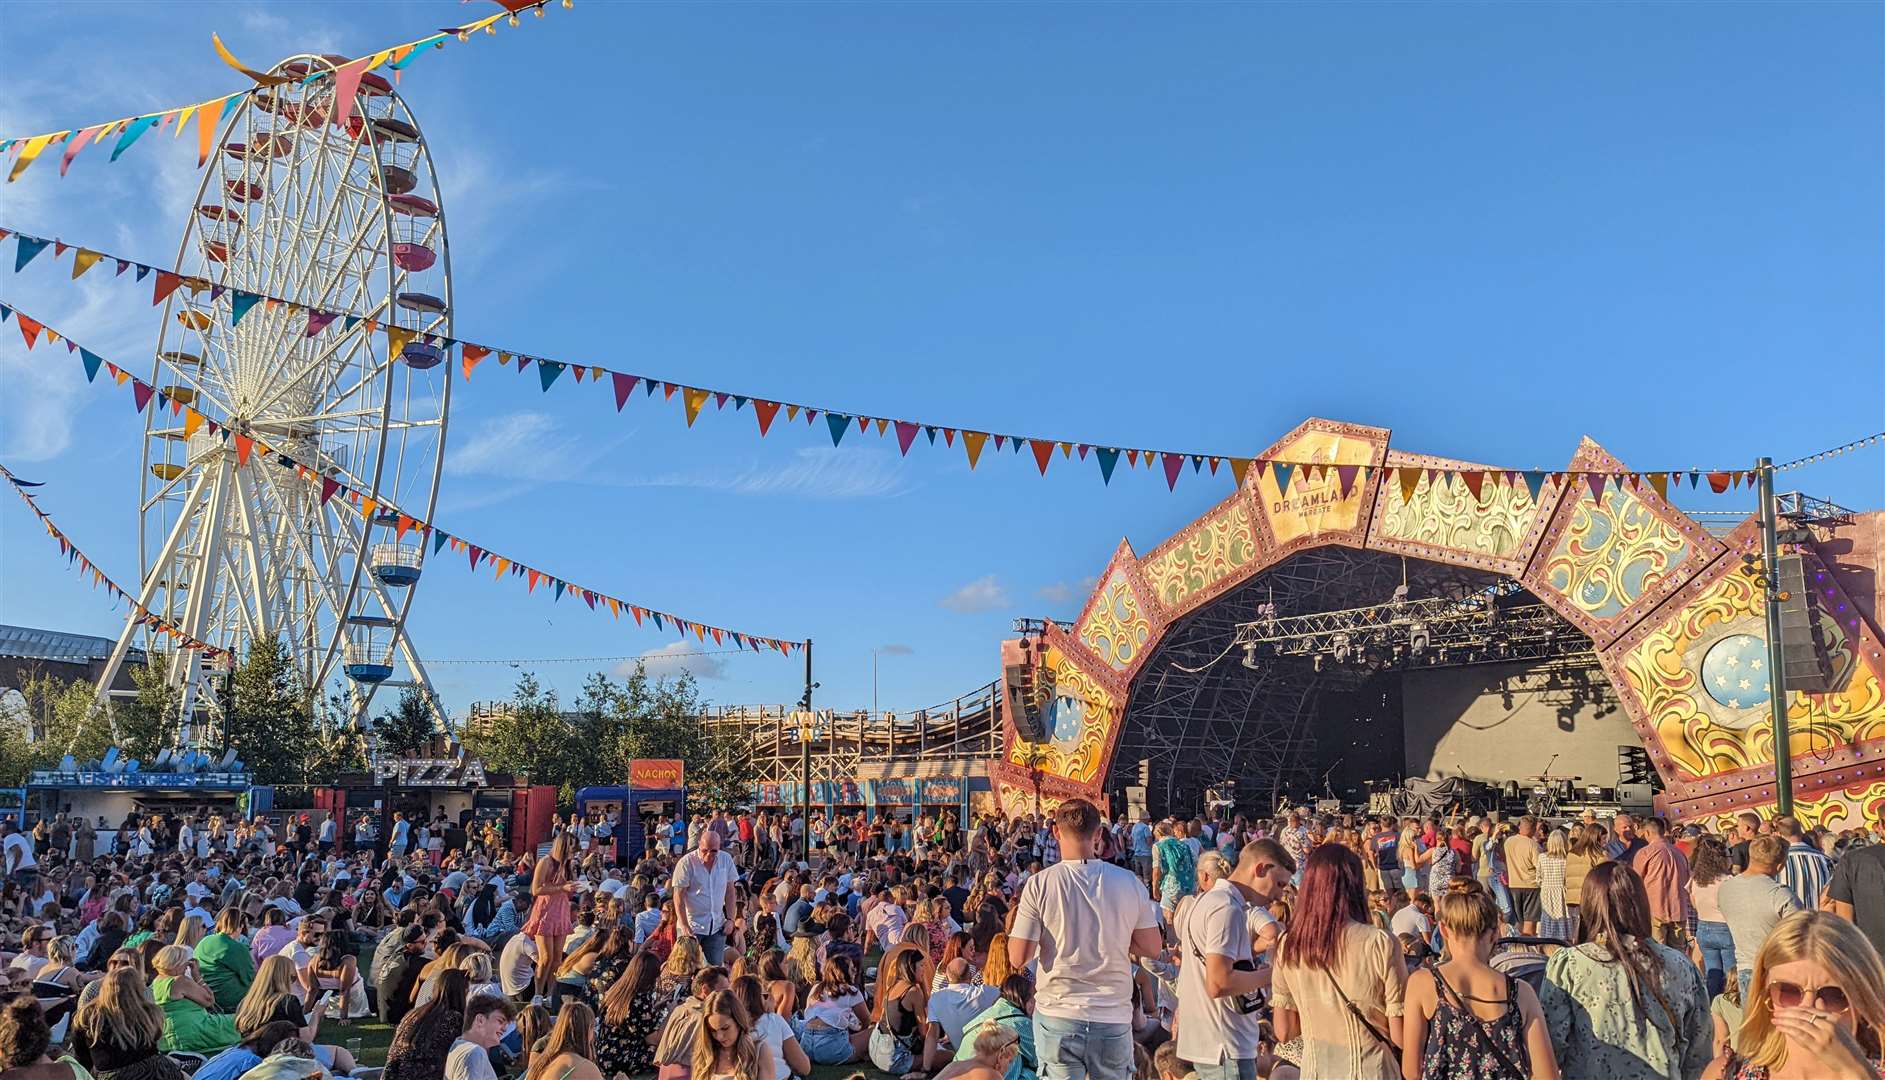 Dreamland has lined up a number of artists, including Tom Jones and Queens of the Stone Age, to perform this summer. Picture: Dreamland